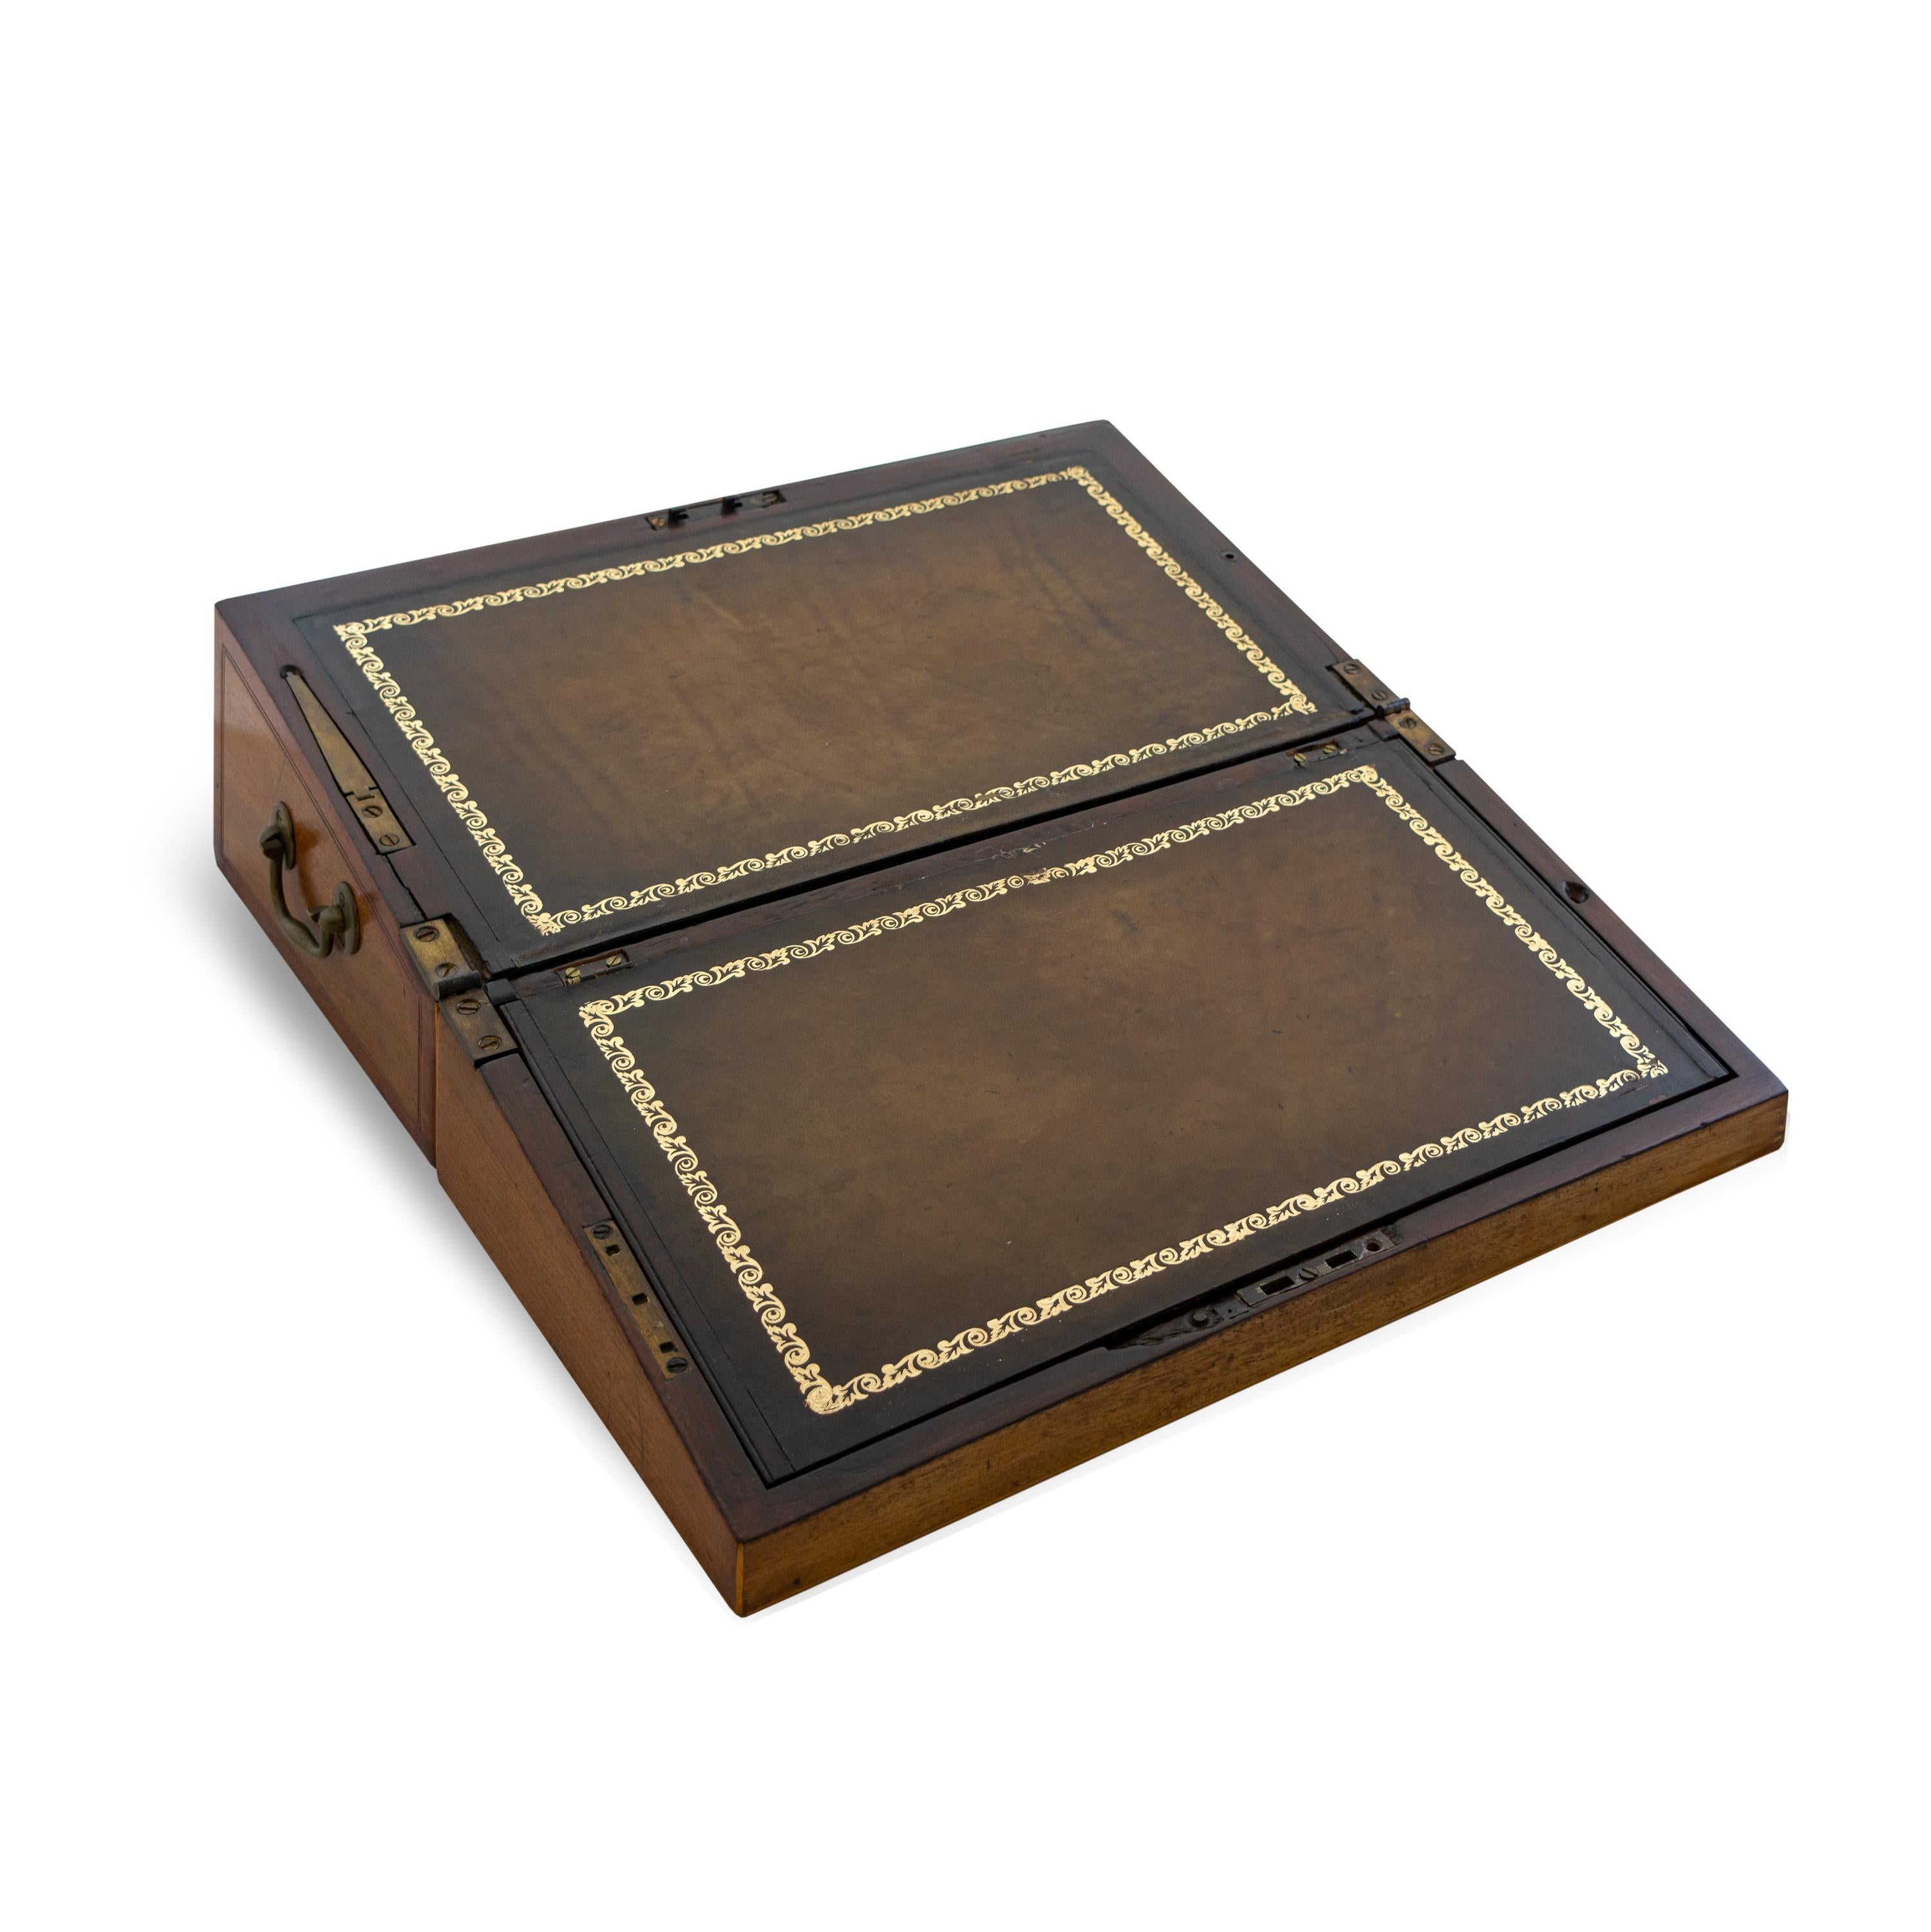 This is a classic George III lap desk with circular satinwood inlay on lid and mahogany banding. The box is situated on a later custom stand with chamfered legs, Circa 1800.